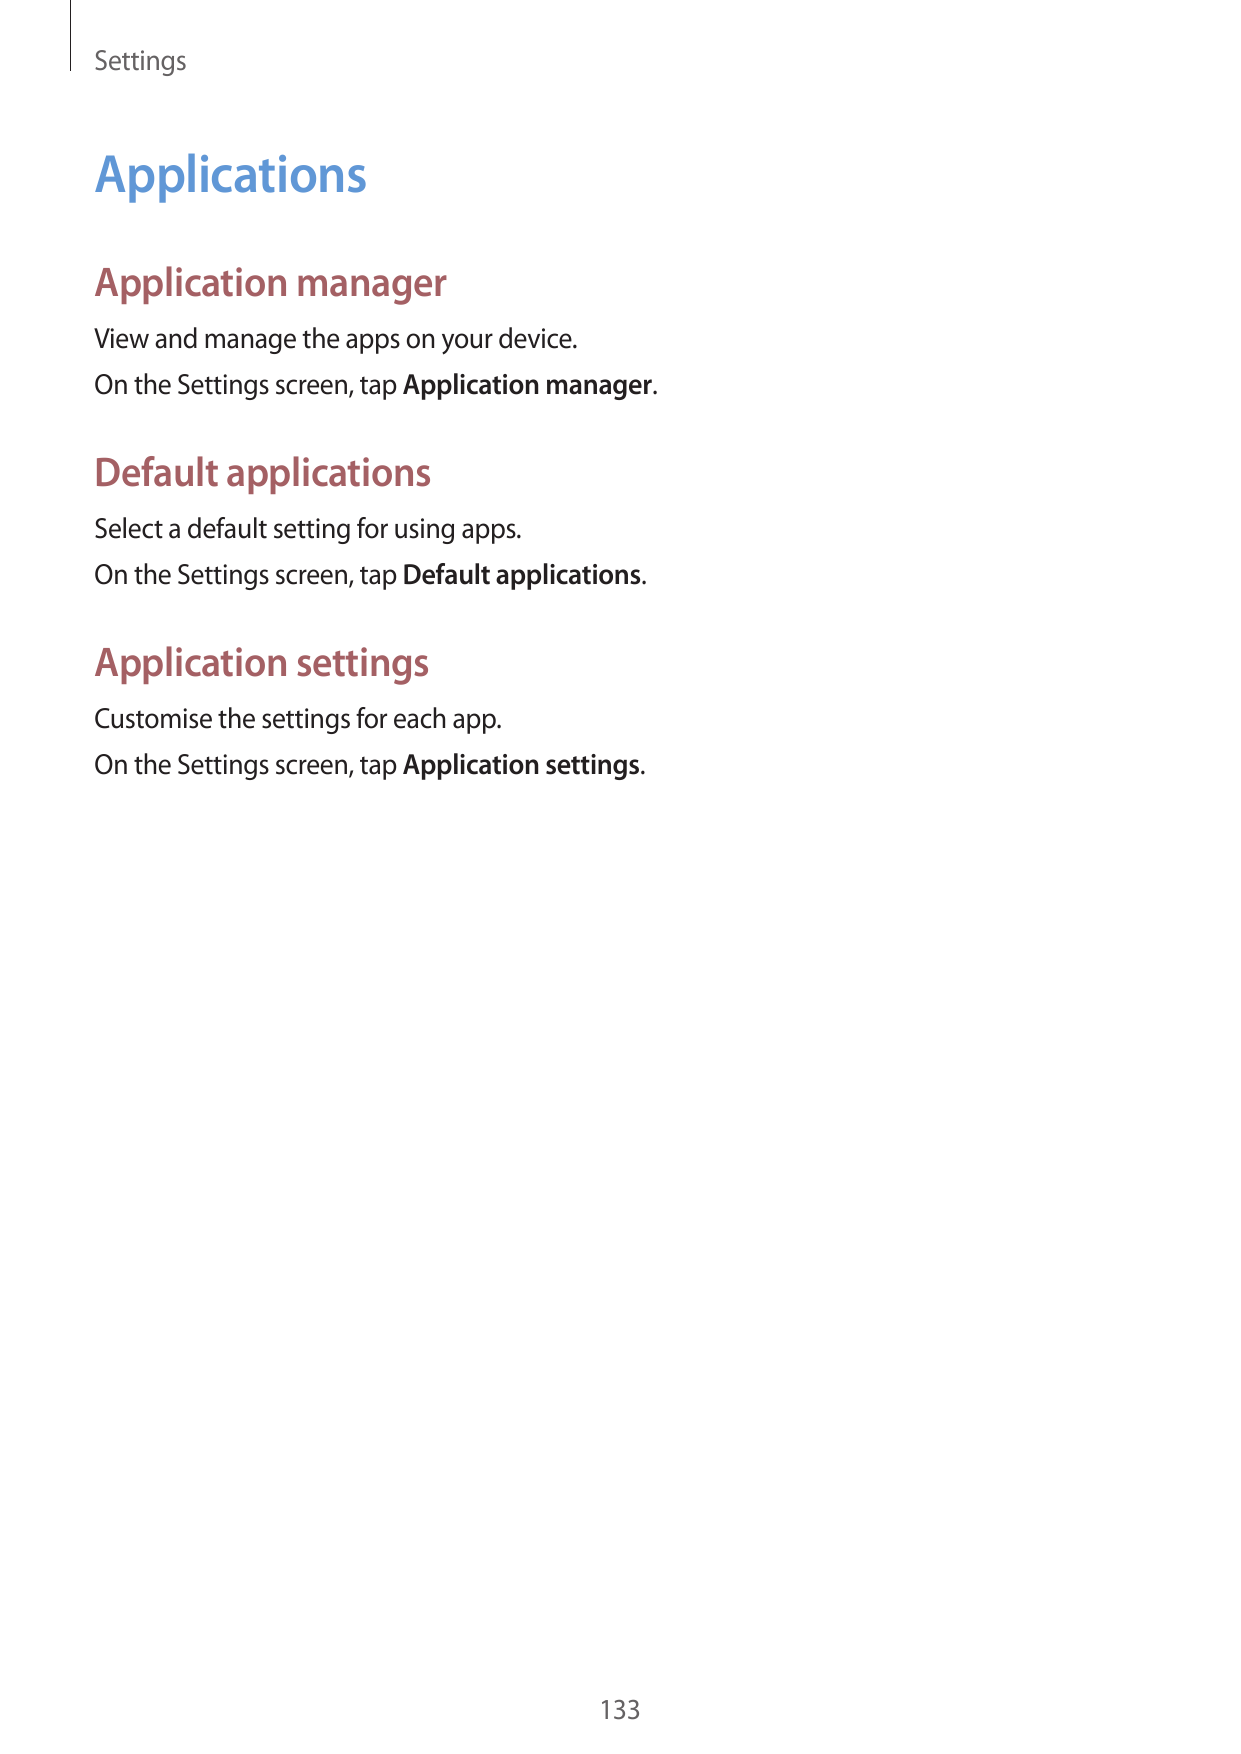 SettingsApplicationsApplication managerView and manage the apps on your device.On the Settings screen, tap Application manager.D